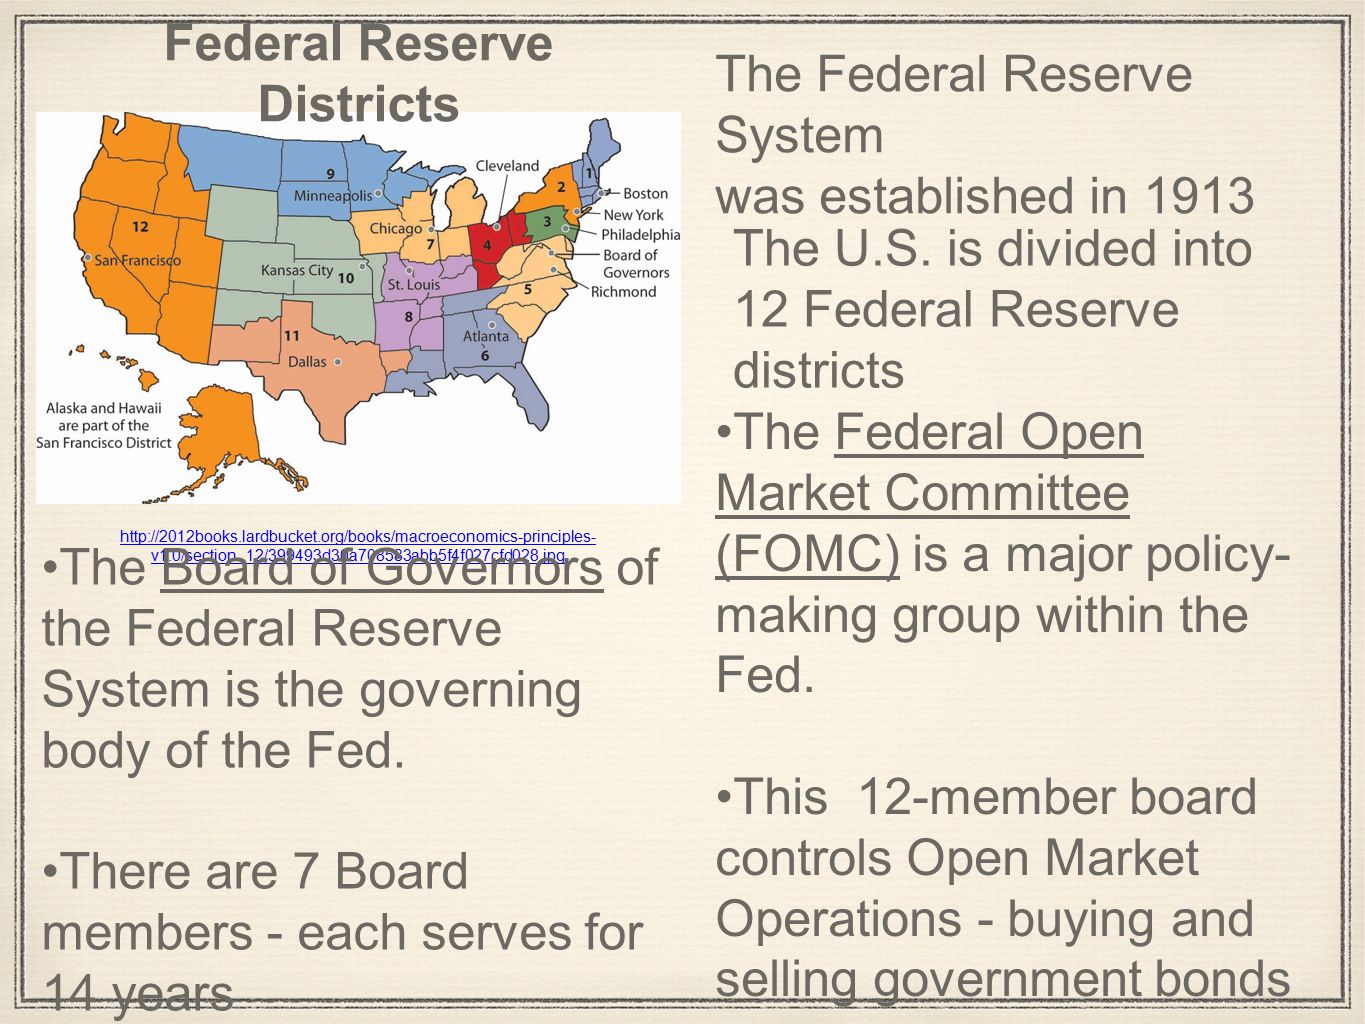 v1.0/section_12/399493d30a708583abb5f4f027cfd028.jpg Federal Reserve Districts The Federal Reserve System was established in 1913 The Board of Governors of the Federal Reserve System is the governing body of the Fed.